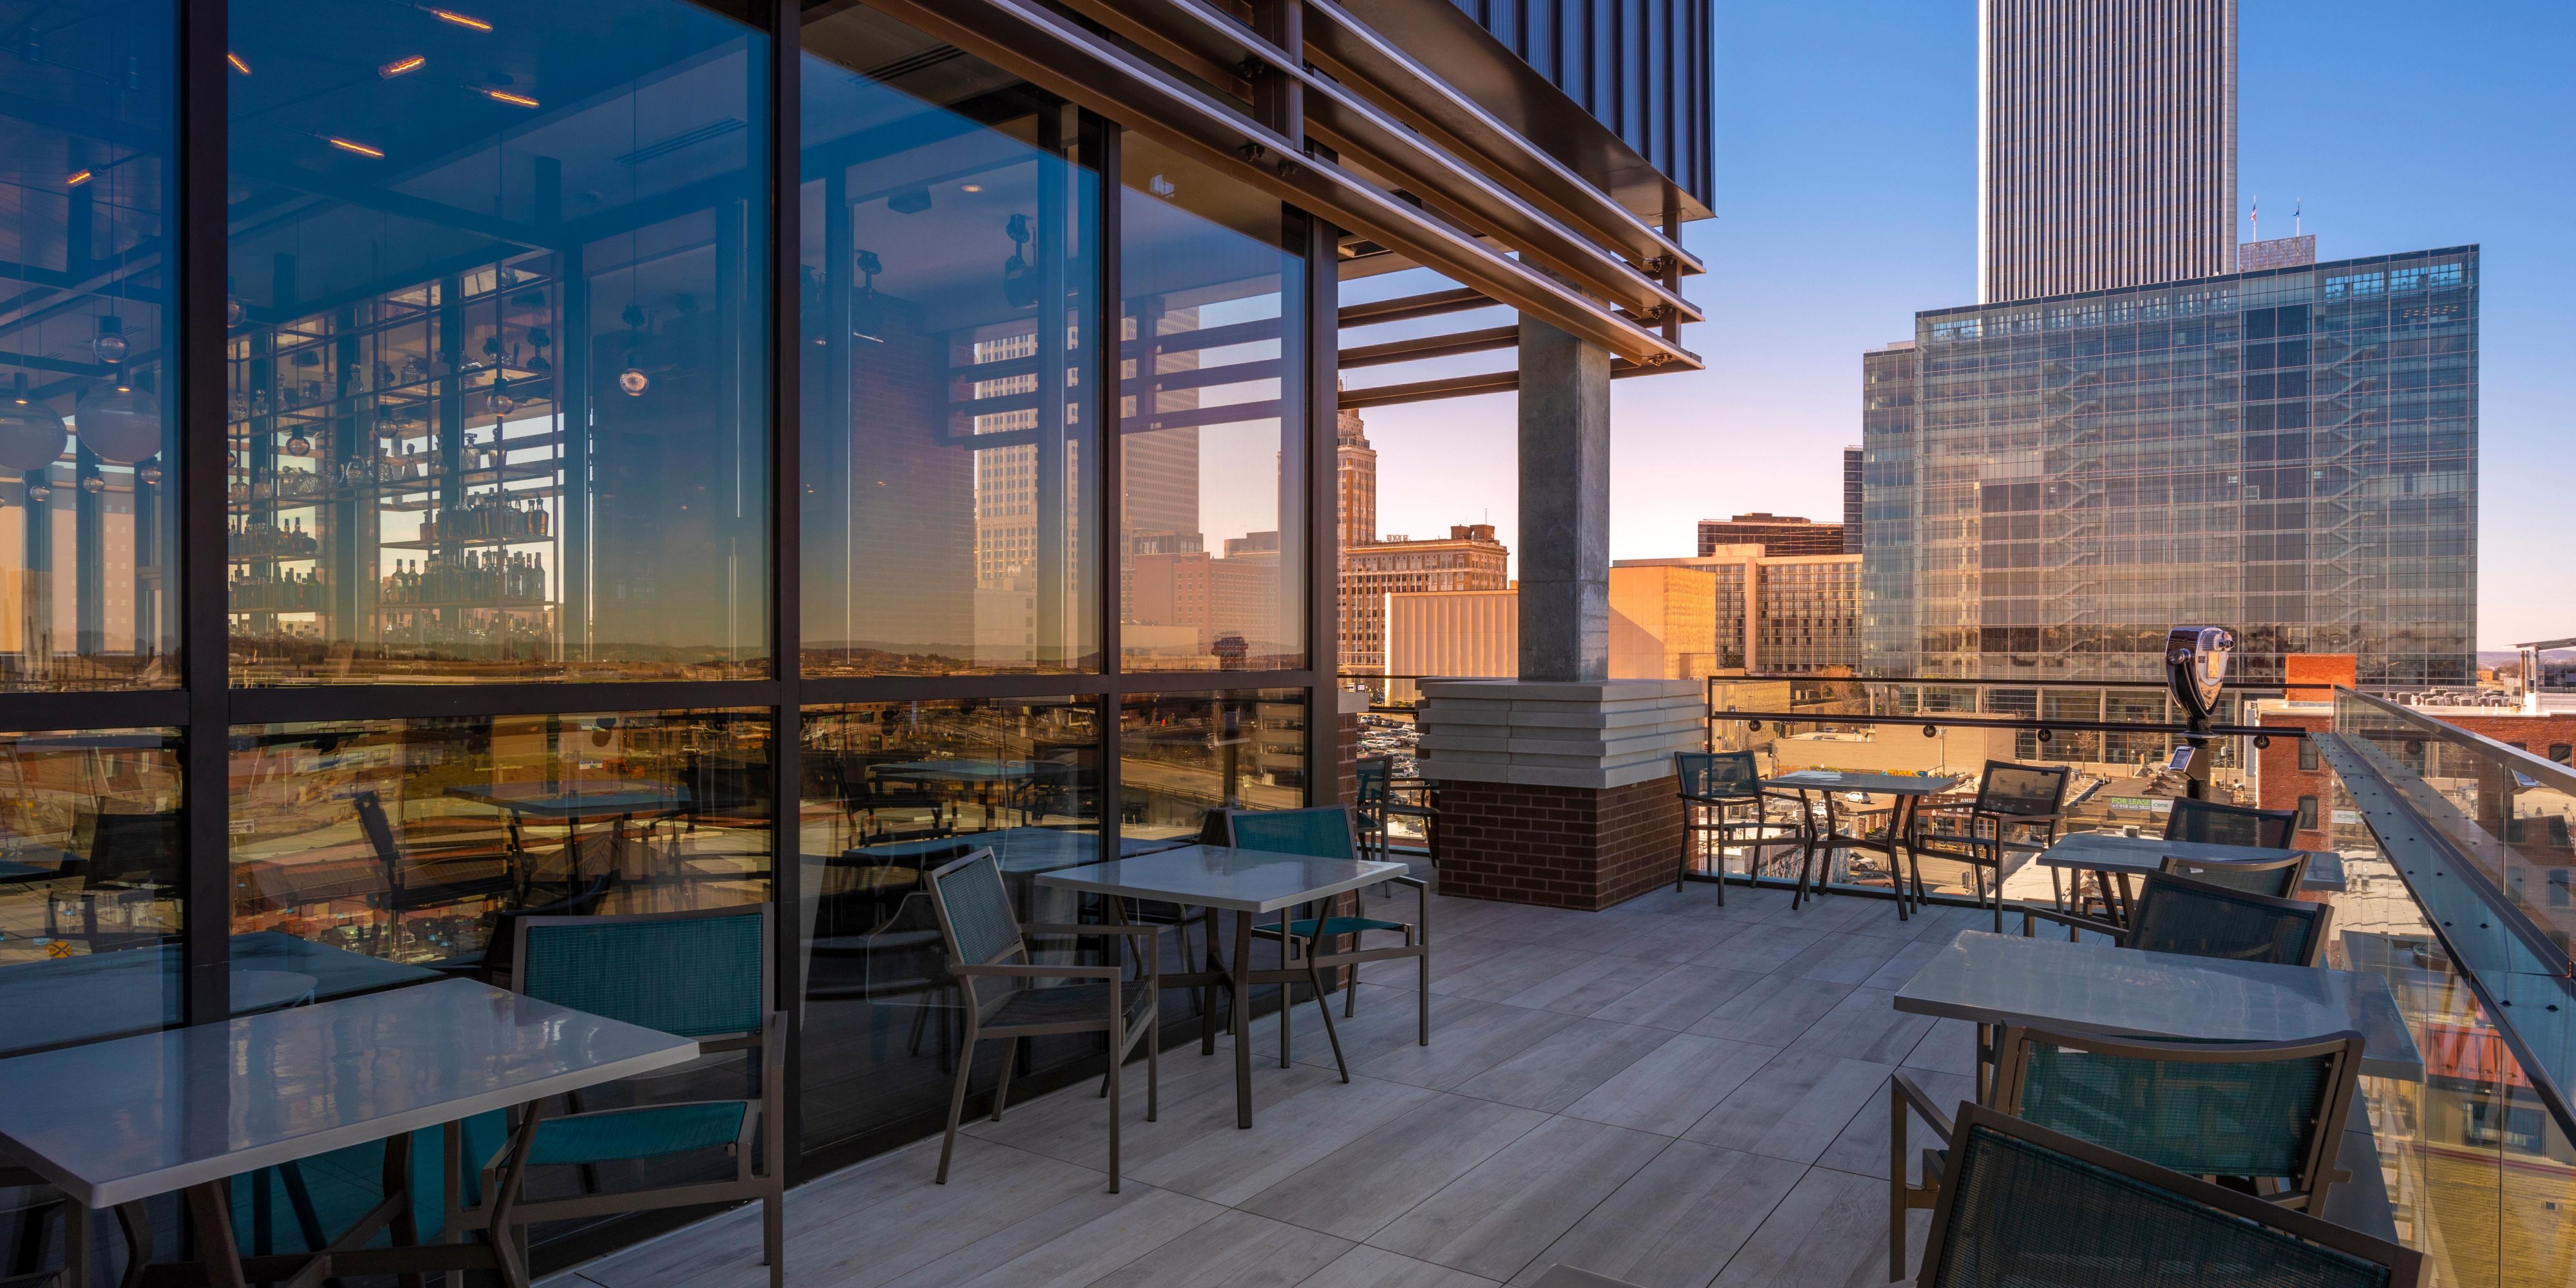 Great views and fantastic cocktails are featured at Roof Sixty Six